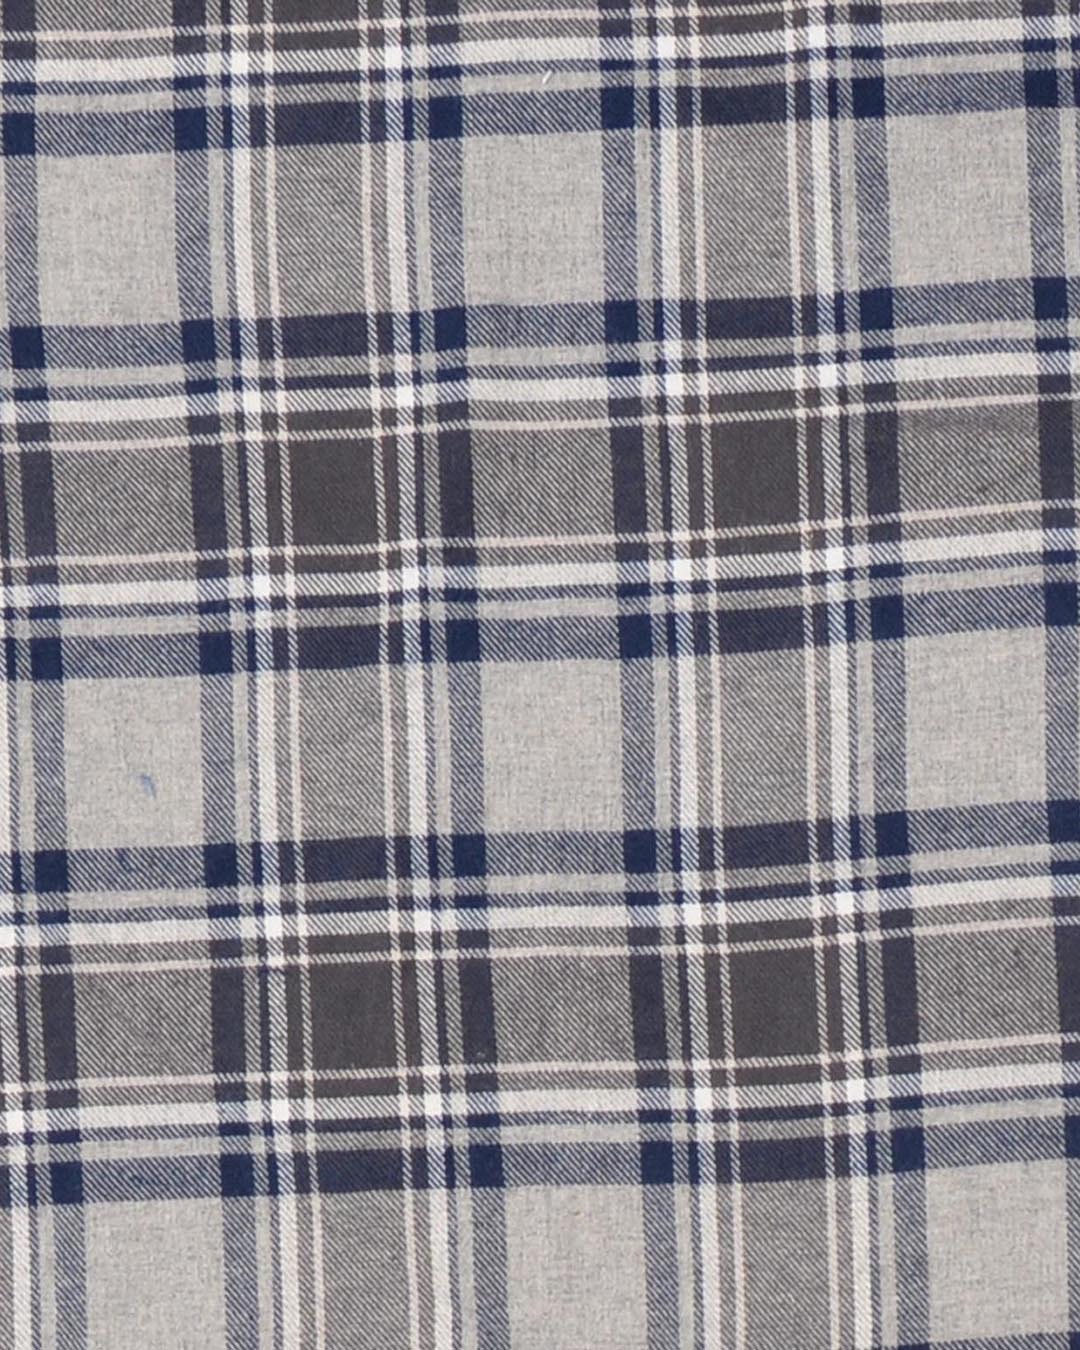 Closeup view of custom check shirts for men by Luxire dark gull grey and navy